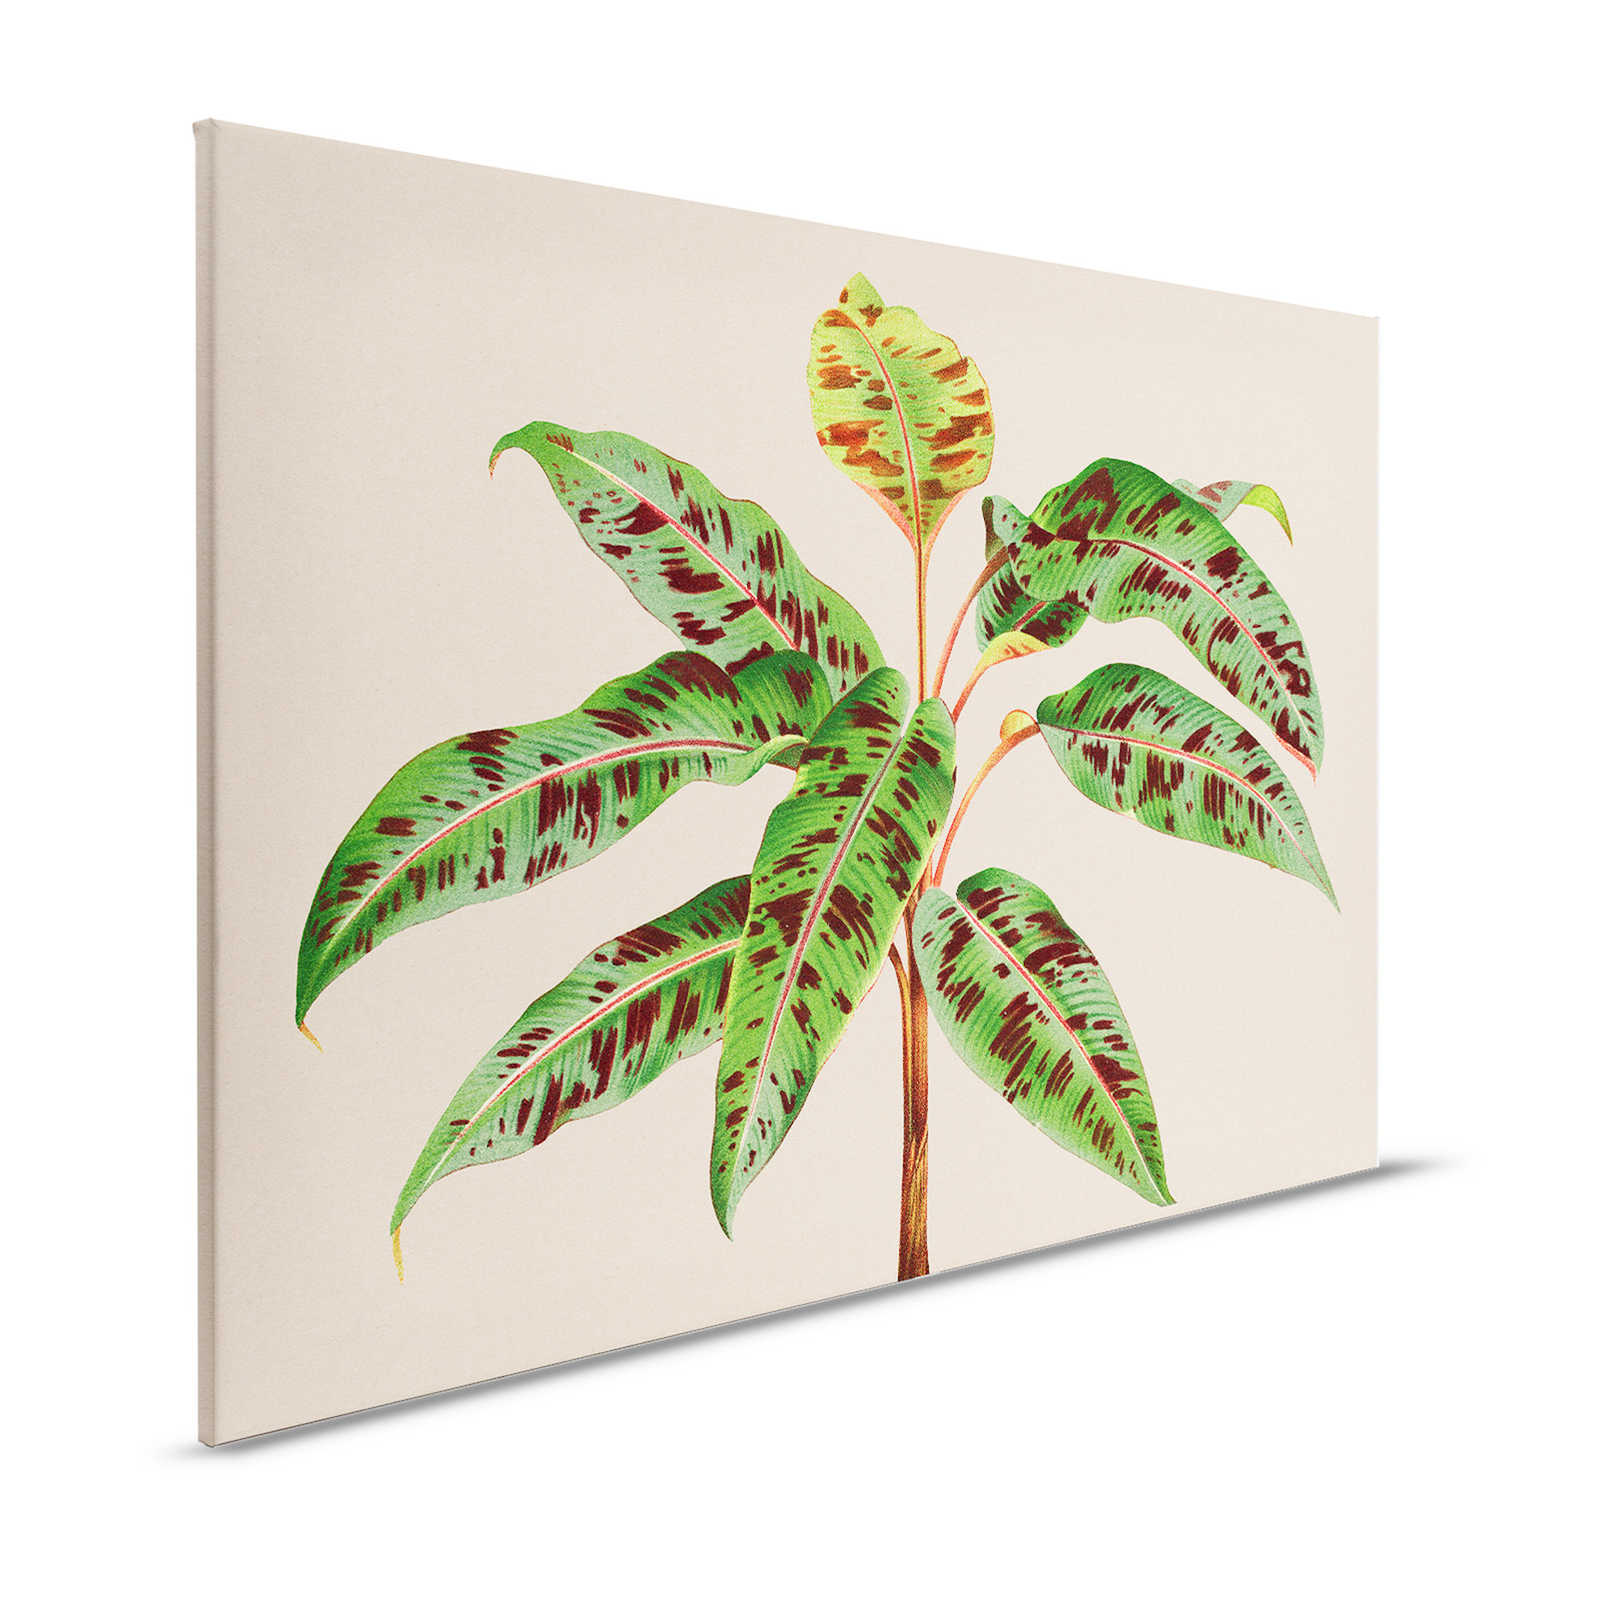 Leaf Garden 4 - Canvas painting Tropical Plant Green Leaves - 1.20 m x 0.80 m
